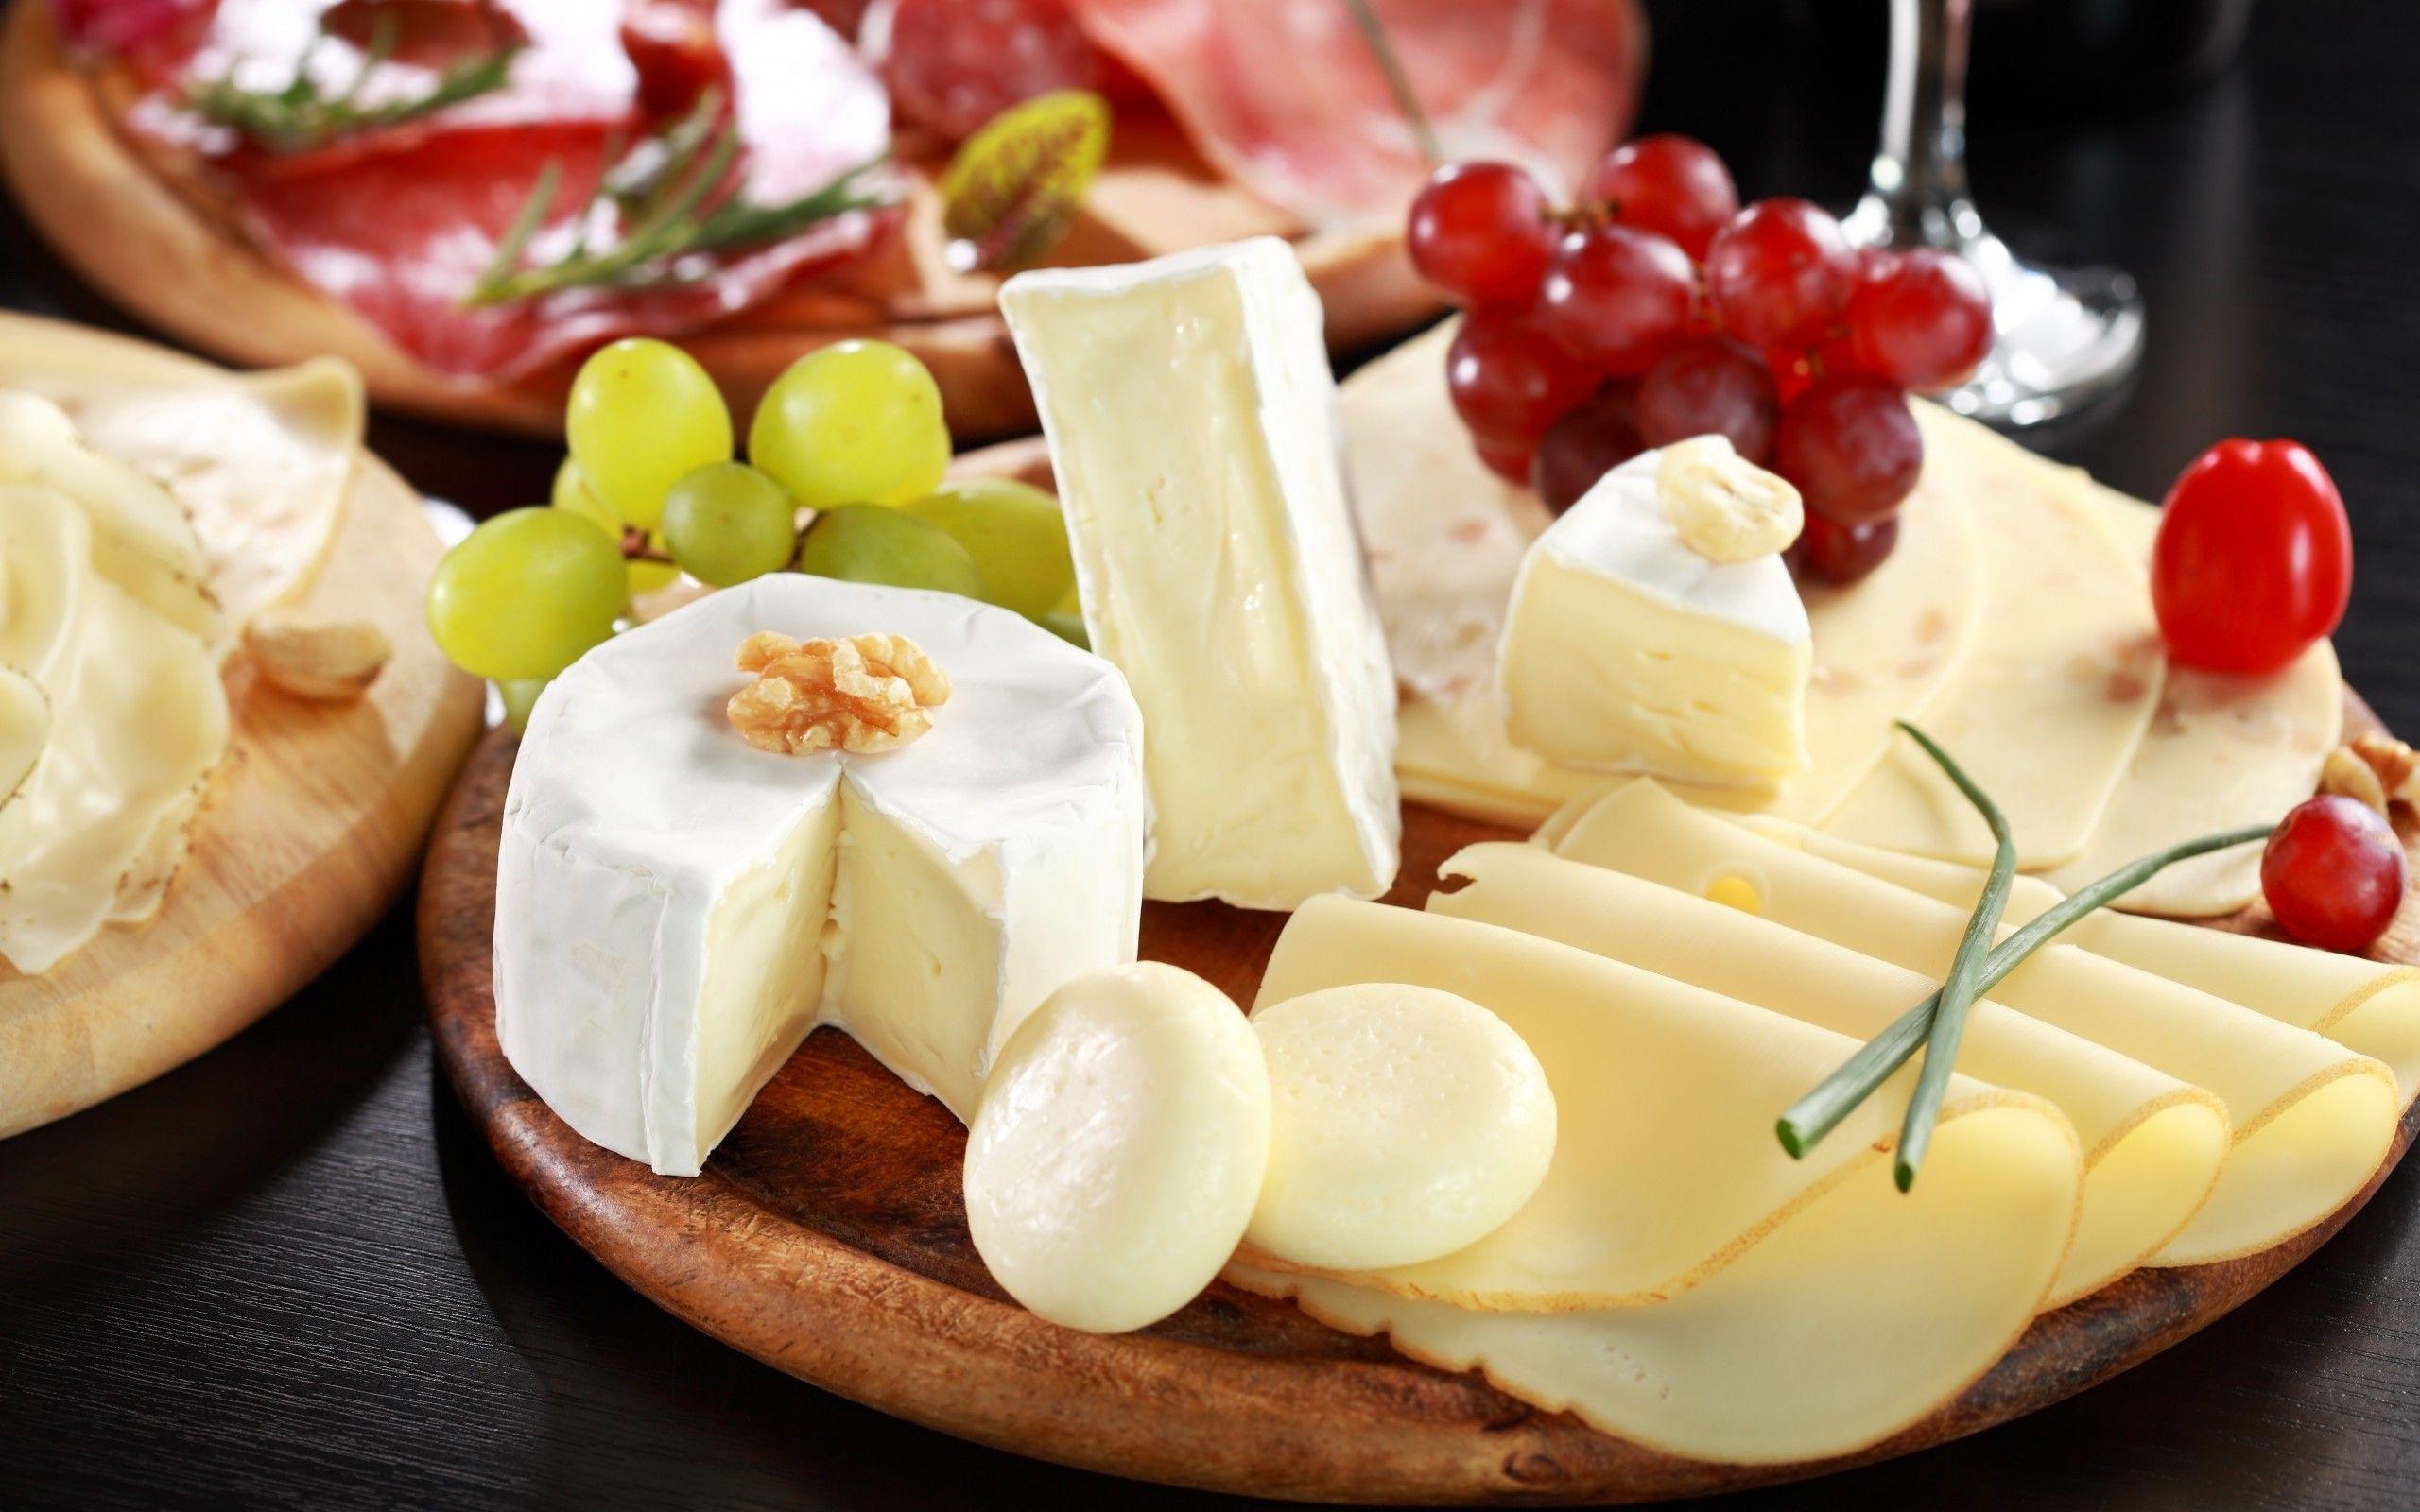 Cheese Wallpaper 42955 2560x1600 px